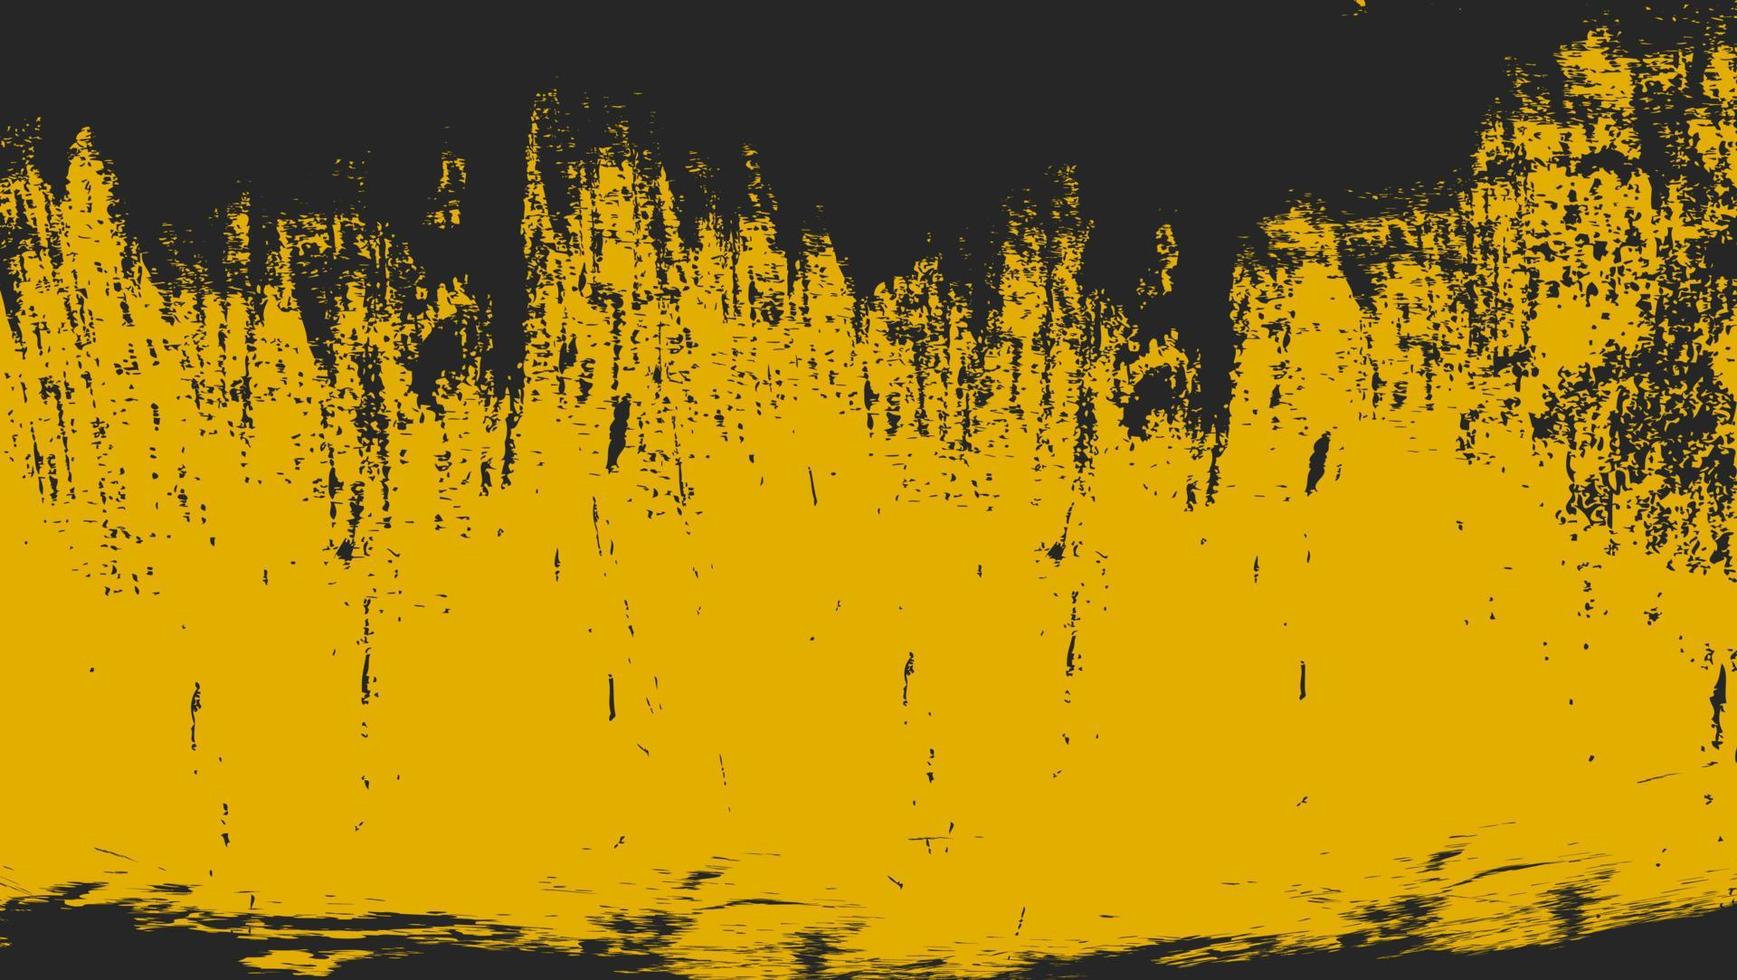 Abstract Yellow Black Scratch Grunge Texture Background vector